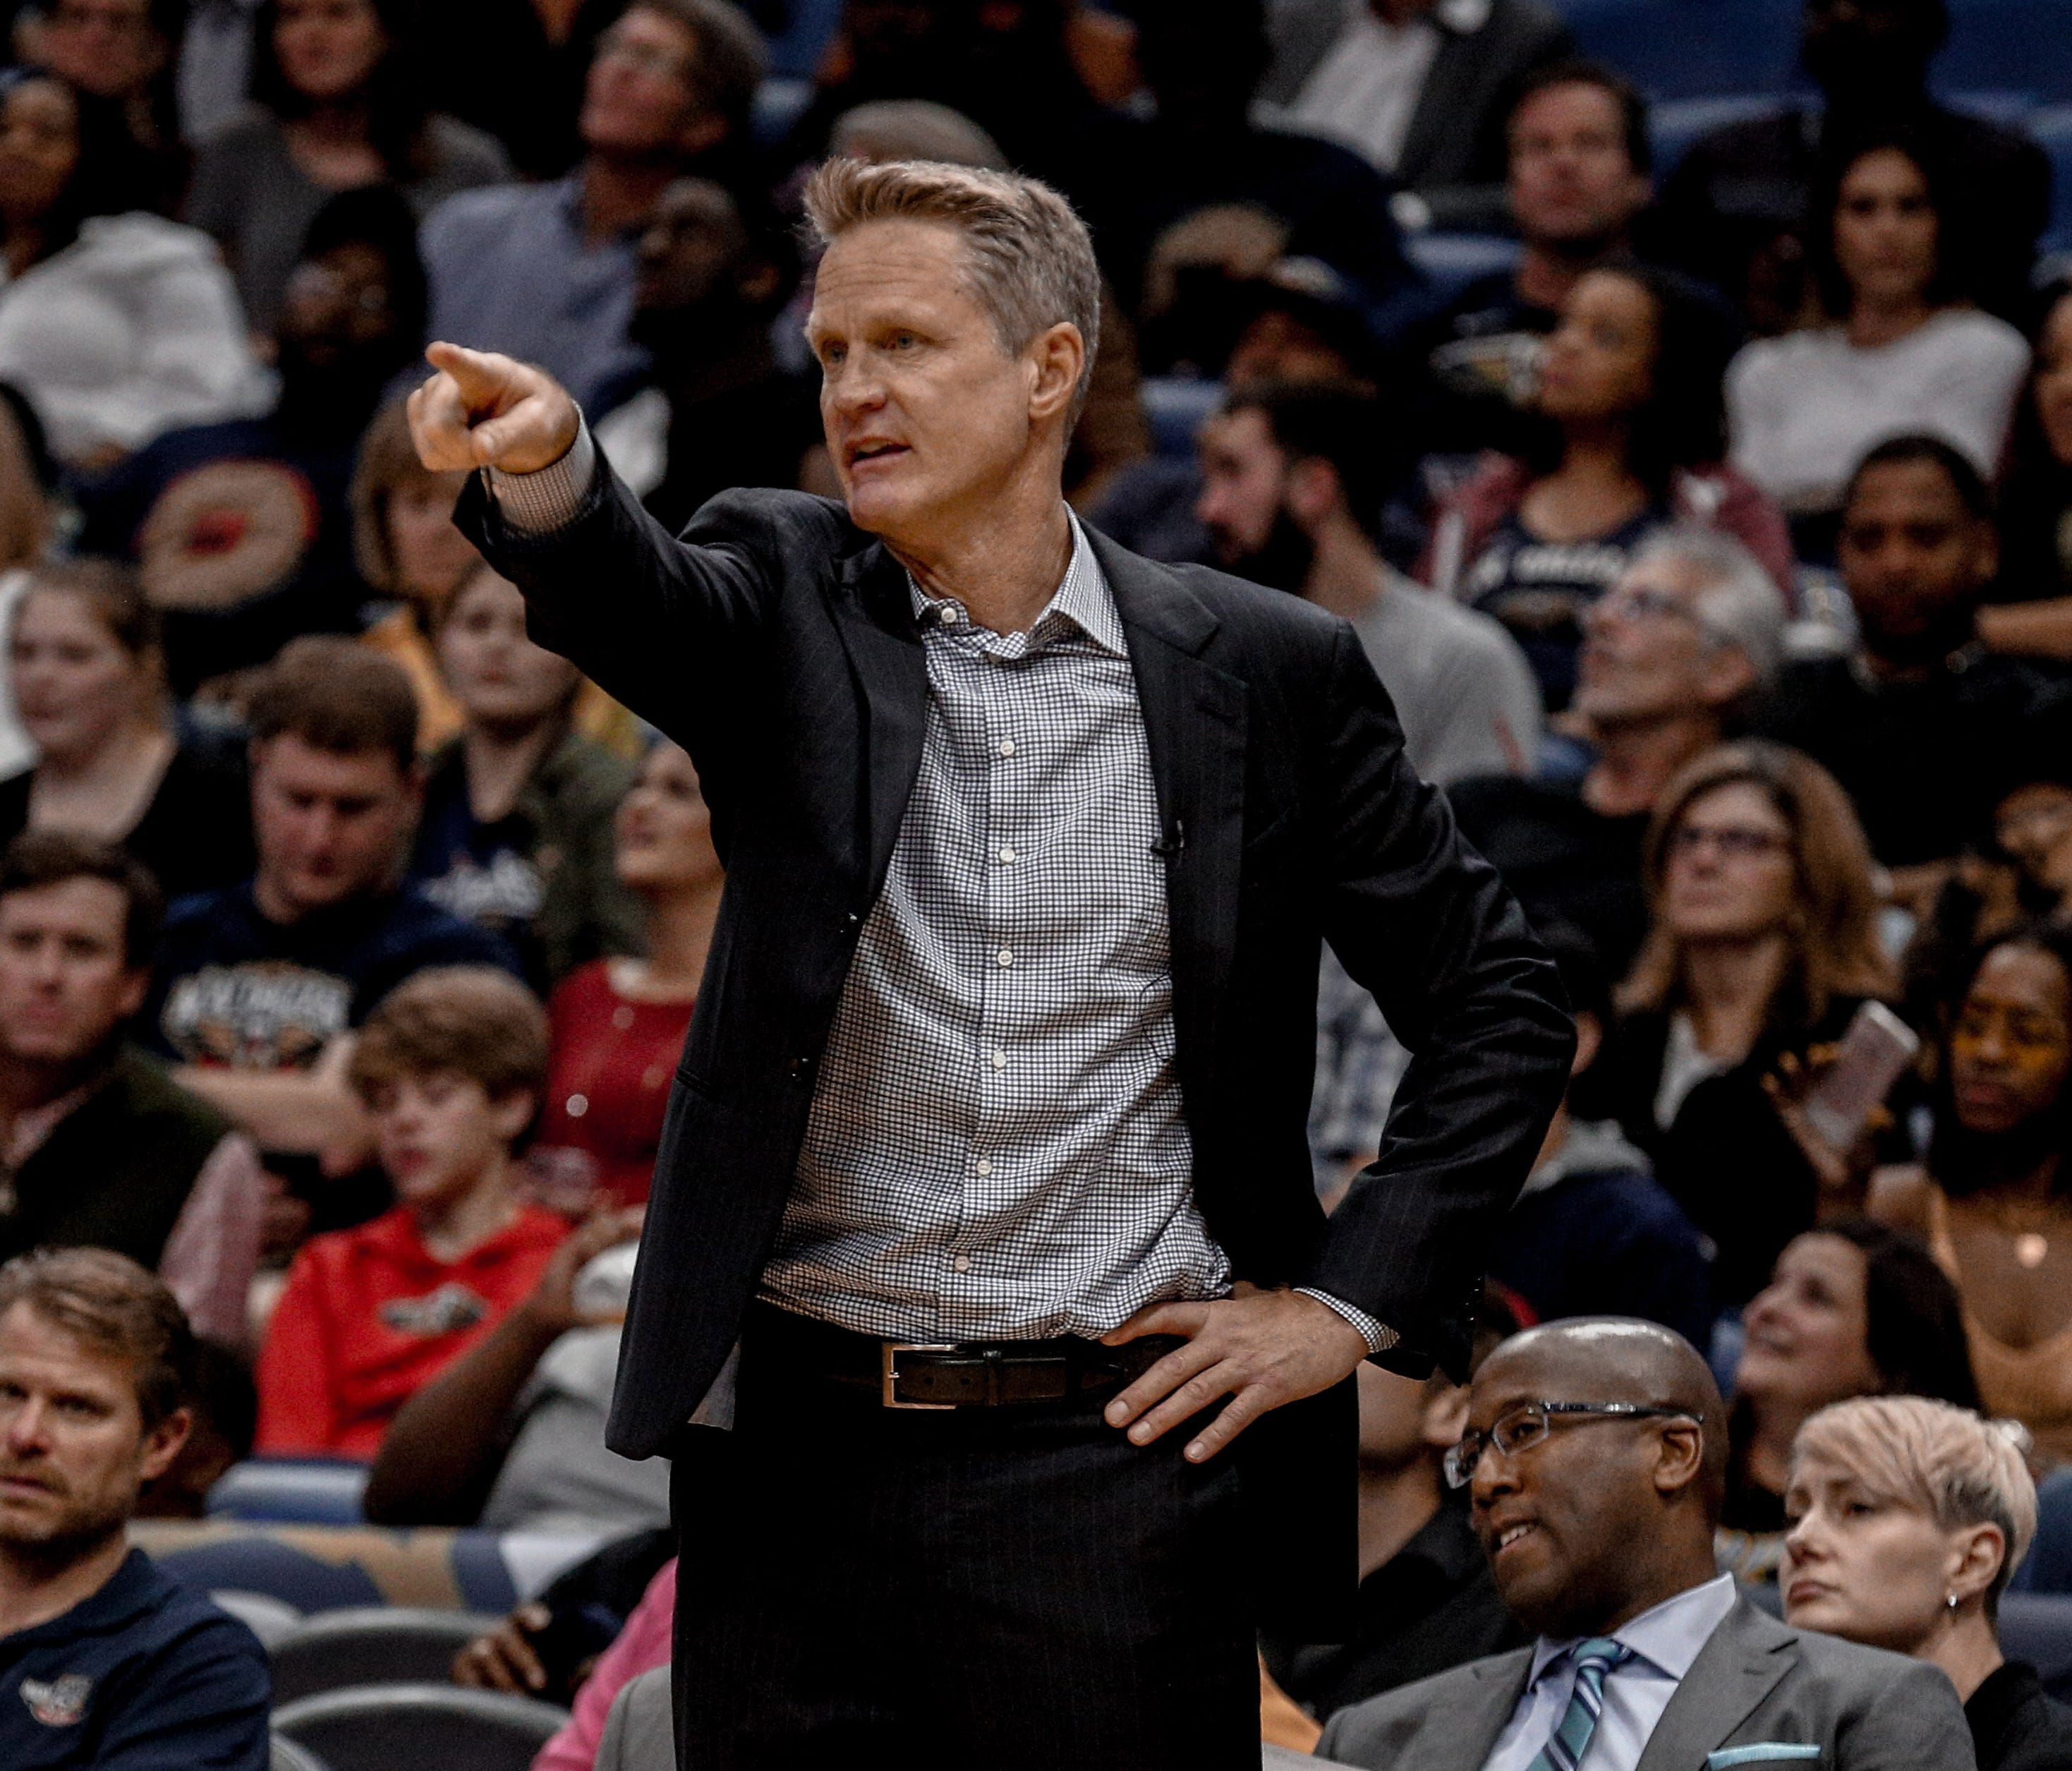 Golden State Warriors head coach Steve Kerr against the New Orleans Pelicans during the second half of a game at the Smoothie King Center.